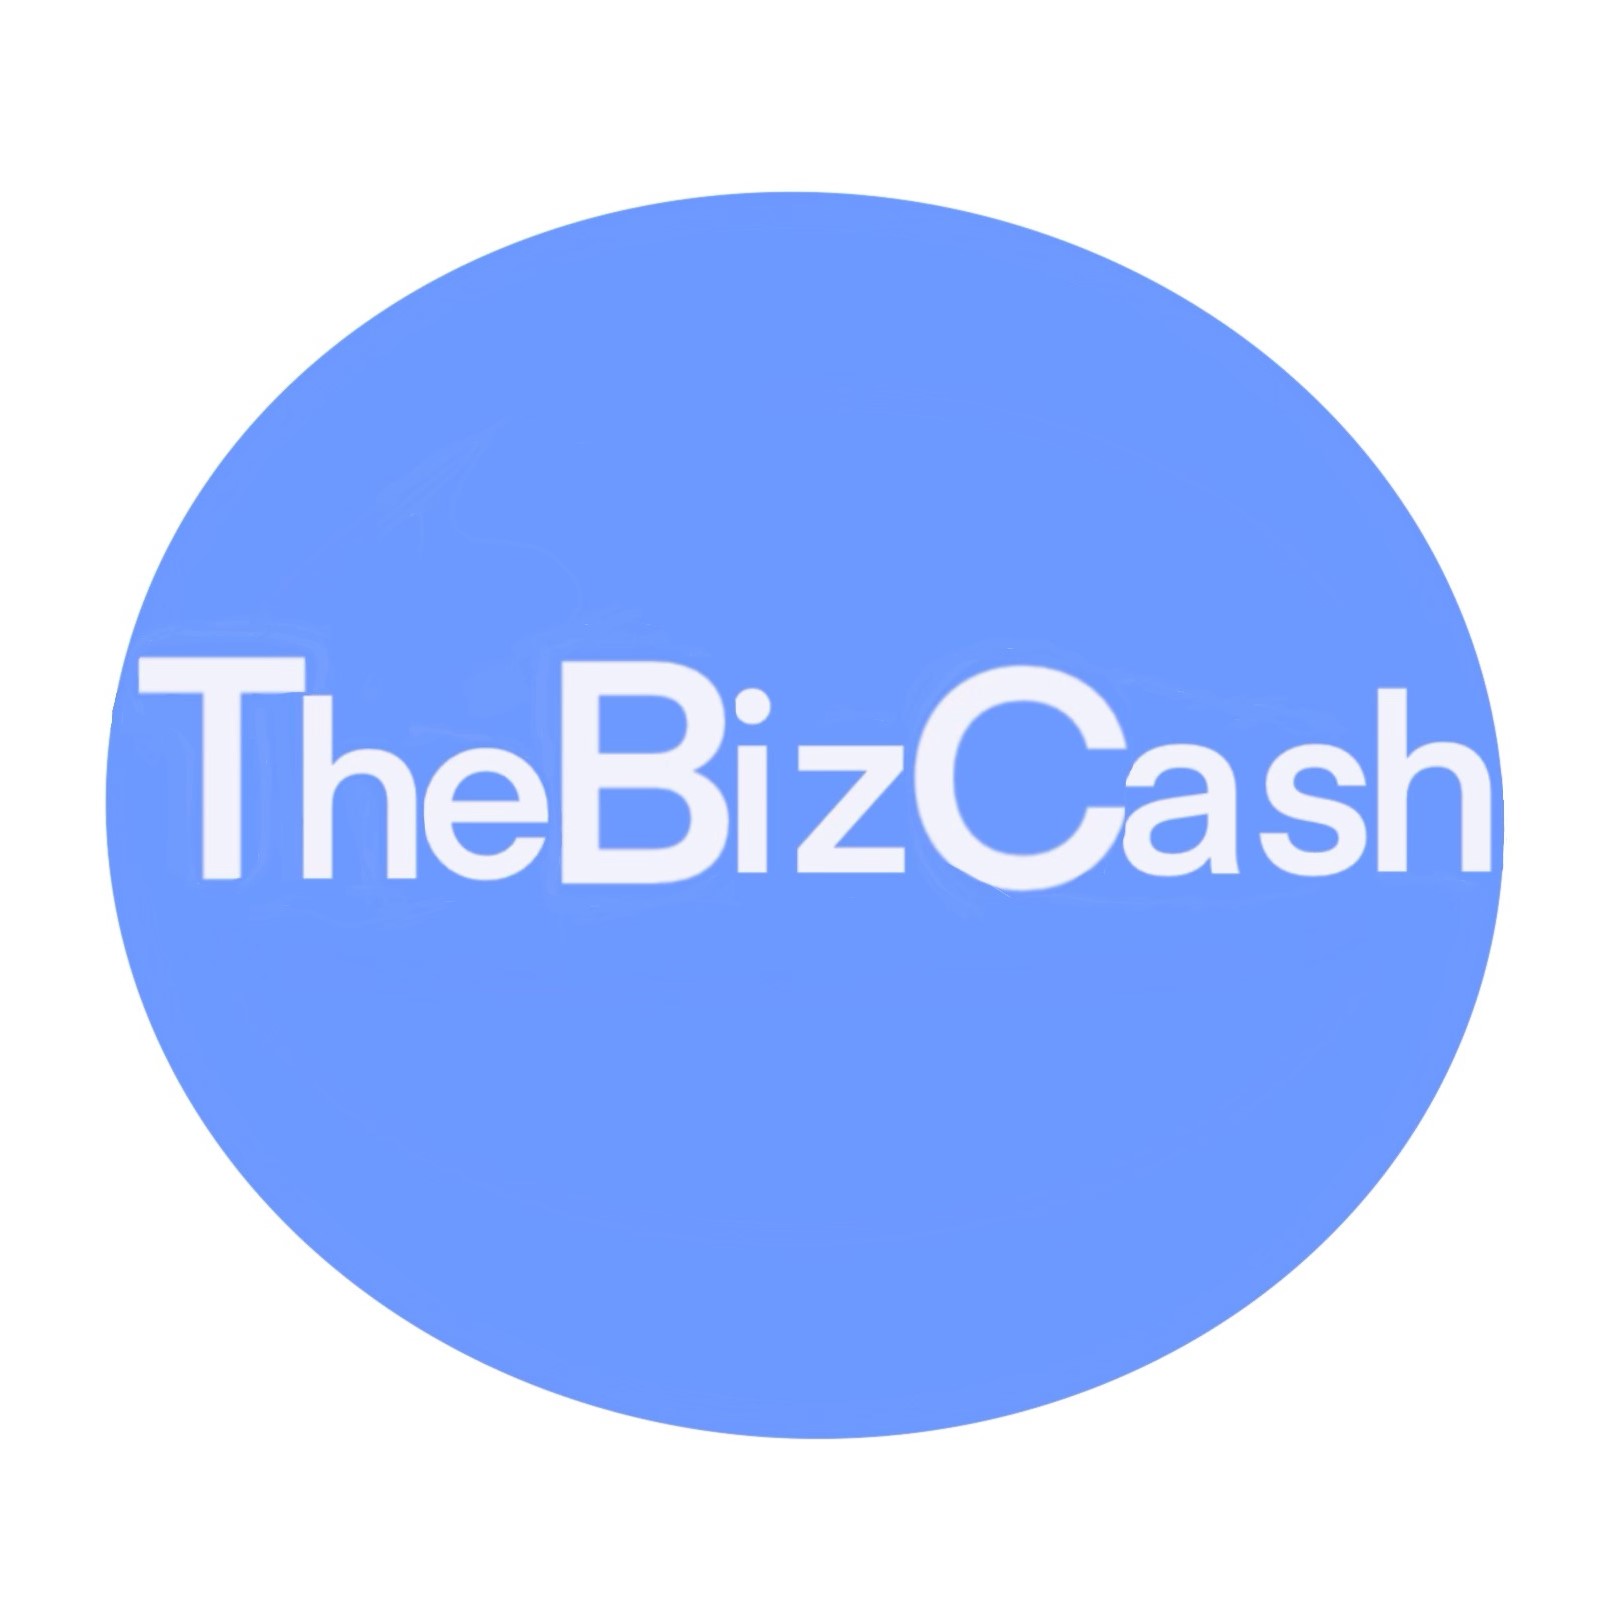 TheBizCash's equity investors receive business loans up to $6,500,000.